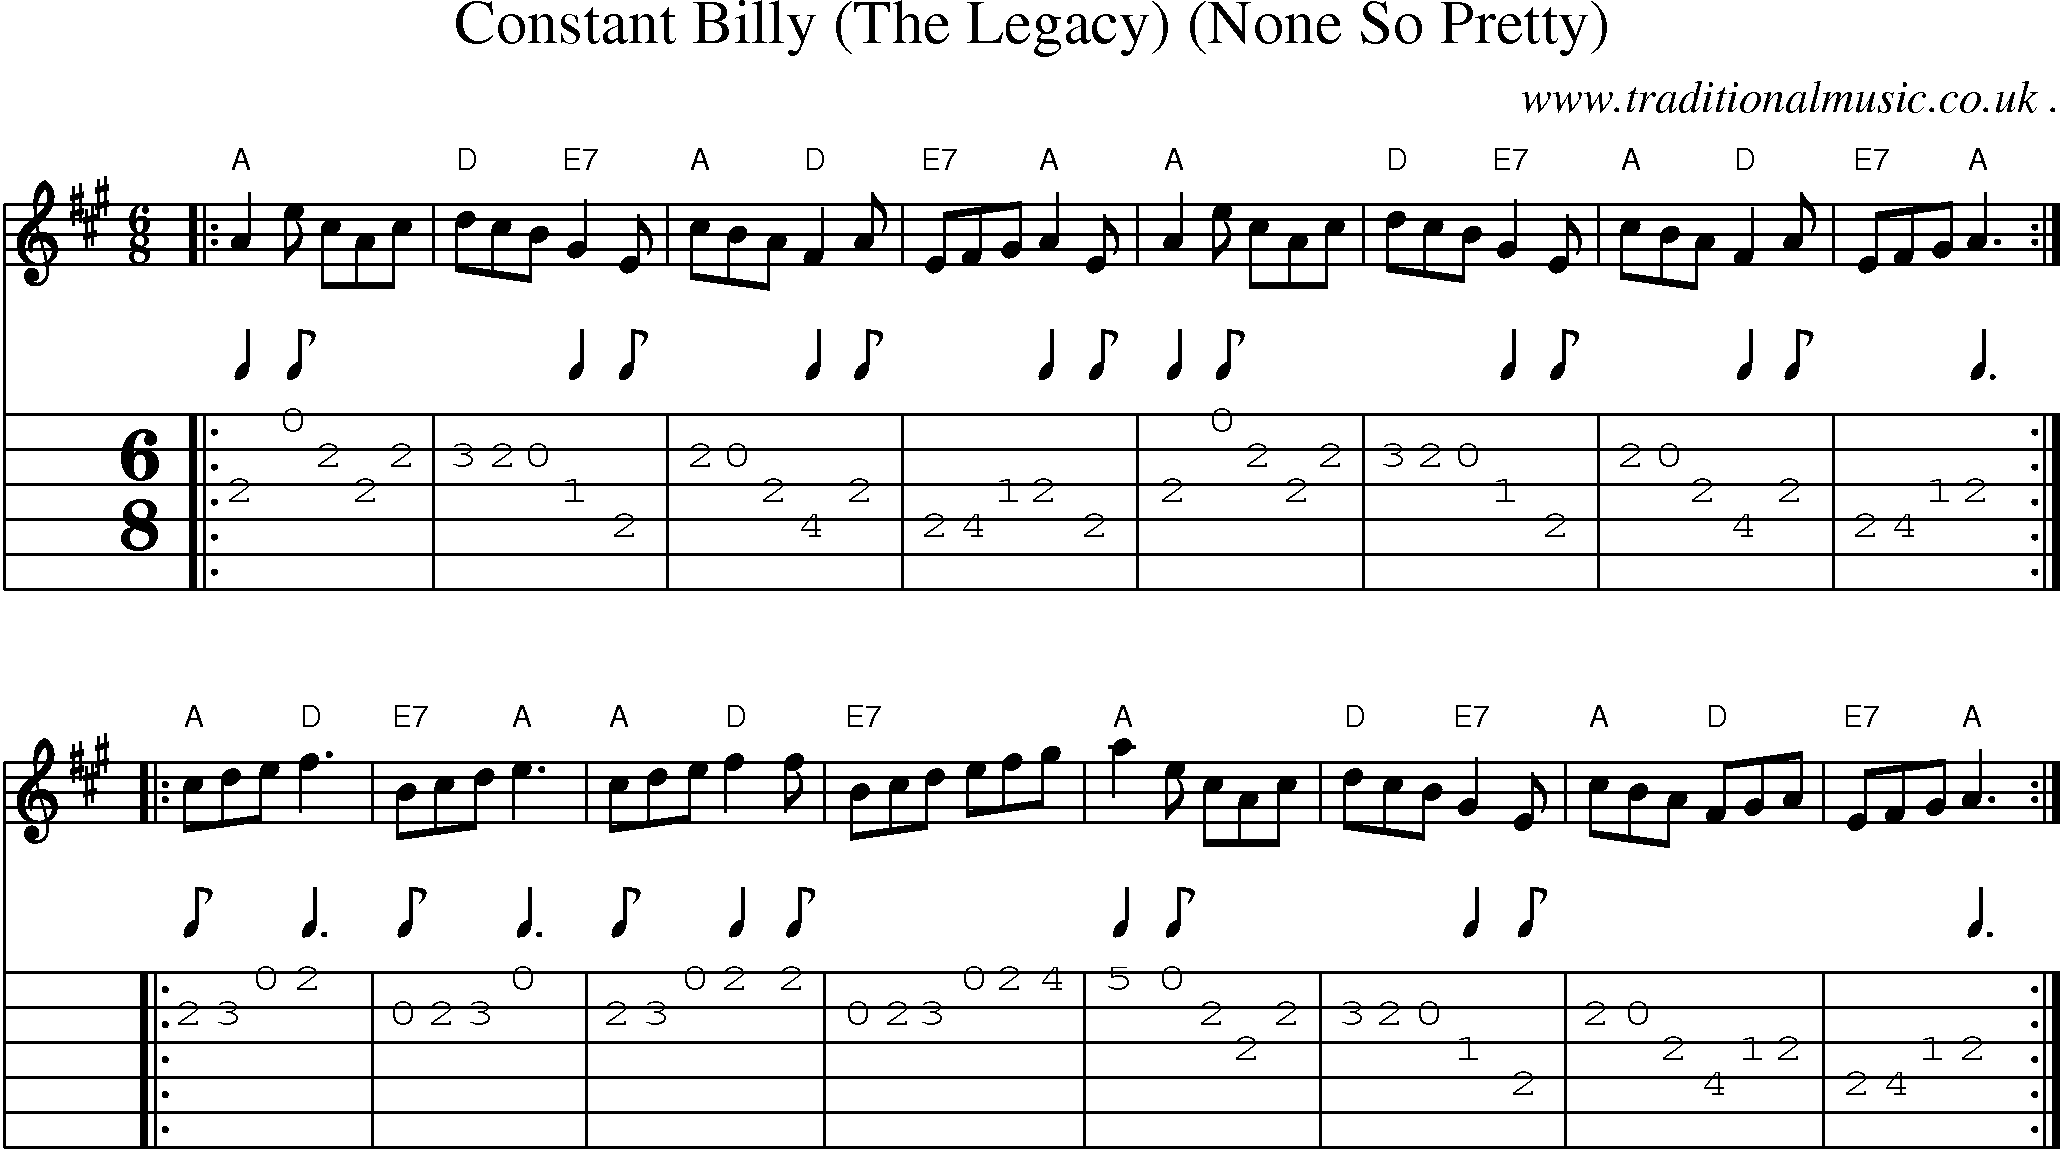 Sheet-music  score, Chords and Guitar Tabs for Constant Billy The Legacy None So Pretty